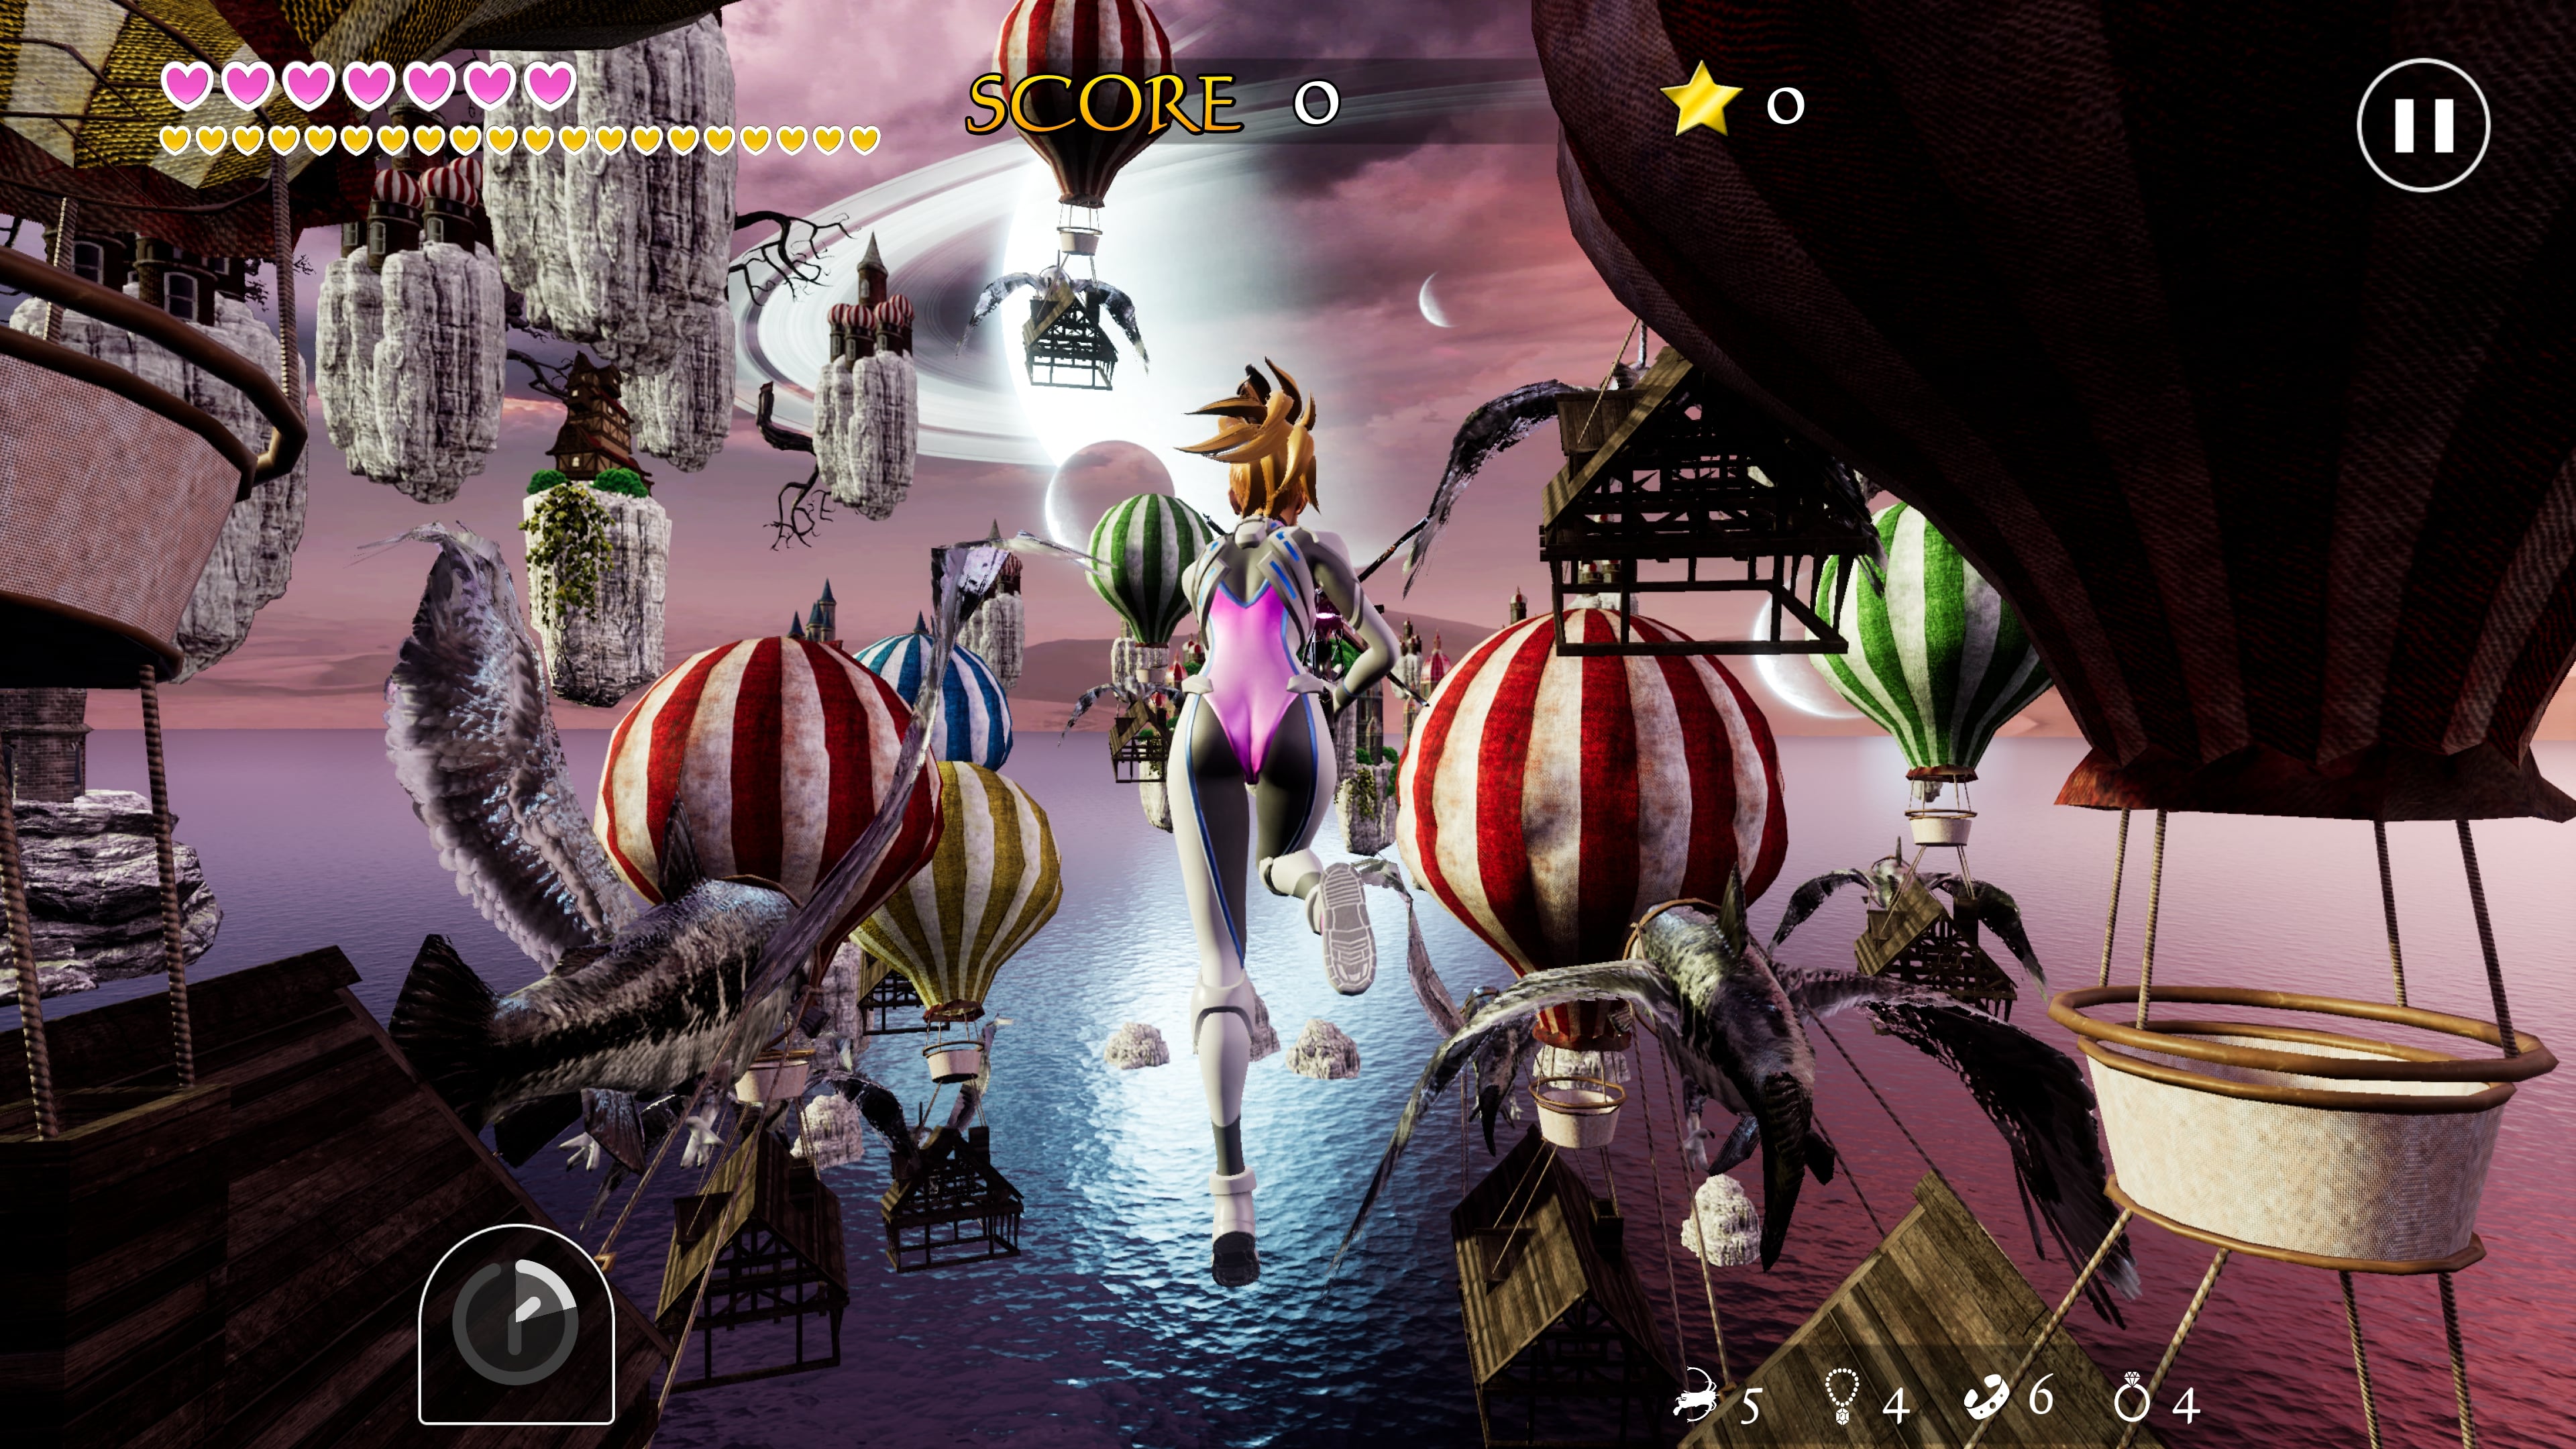 A character flies through a sky full of balloons in Air Twister.